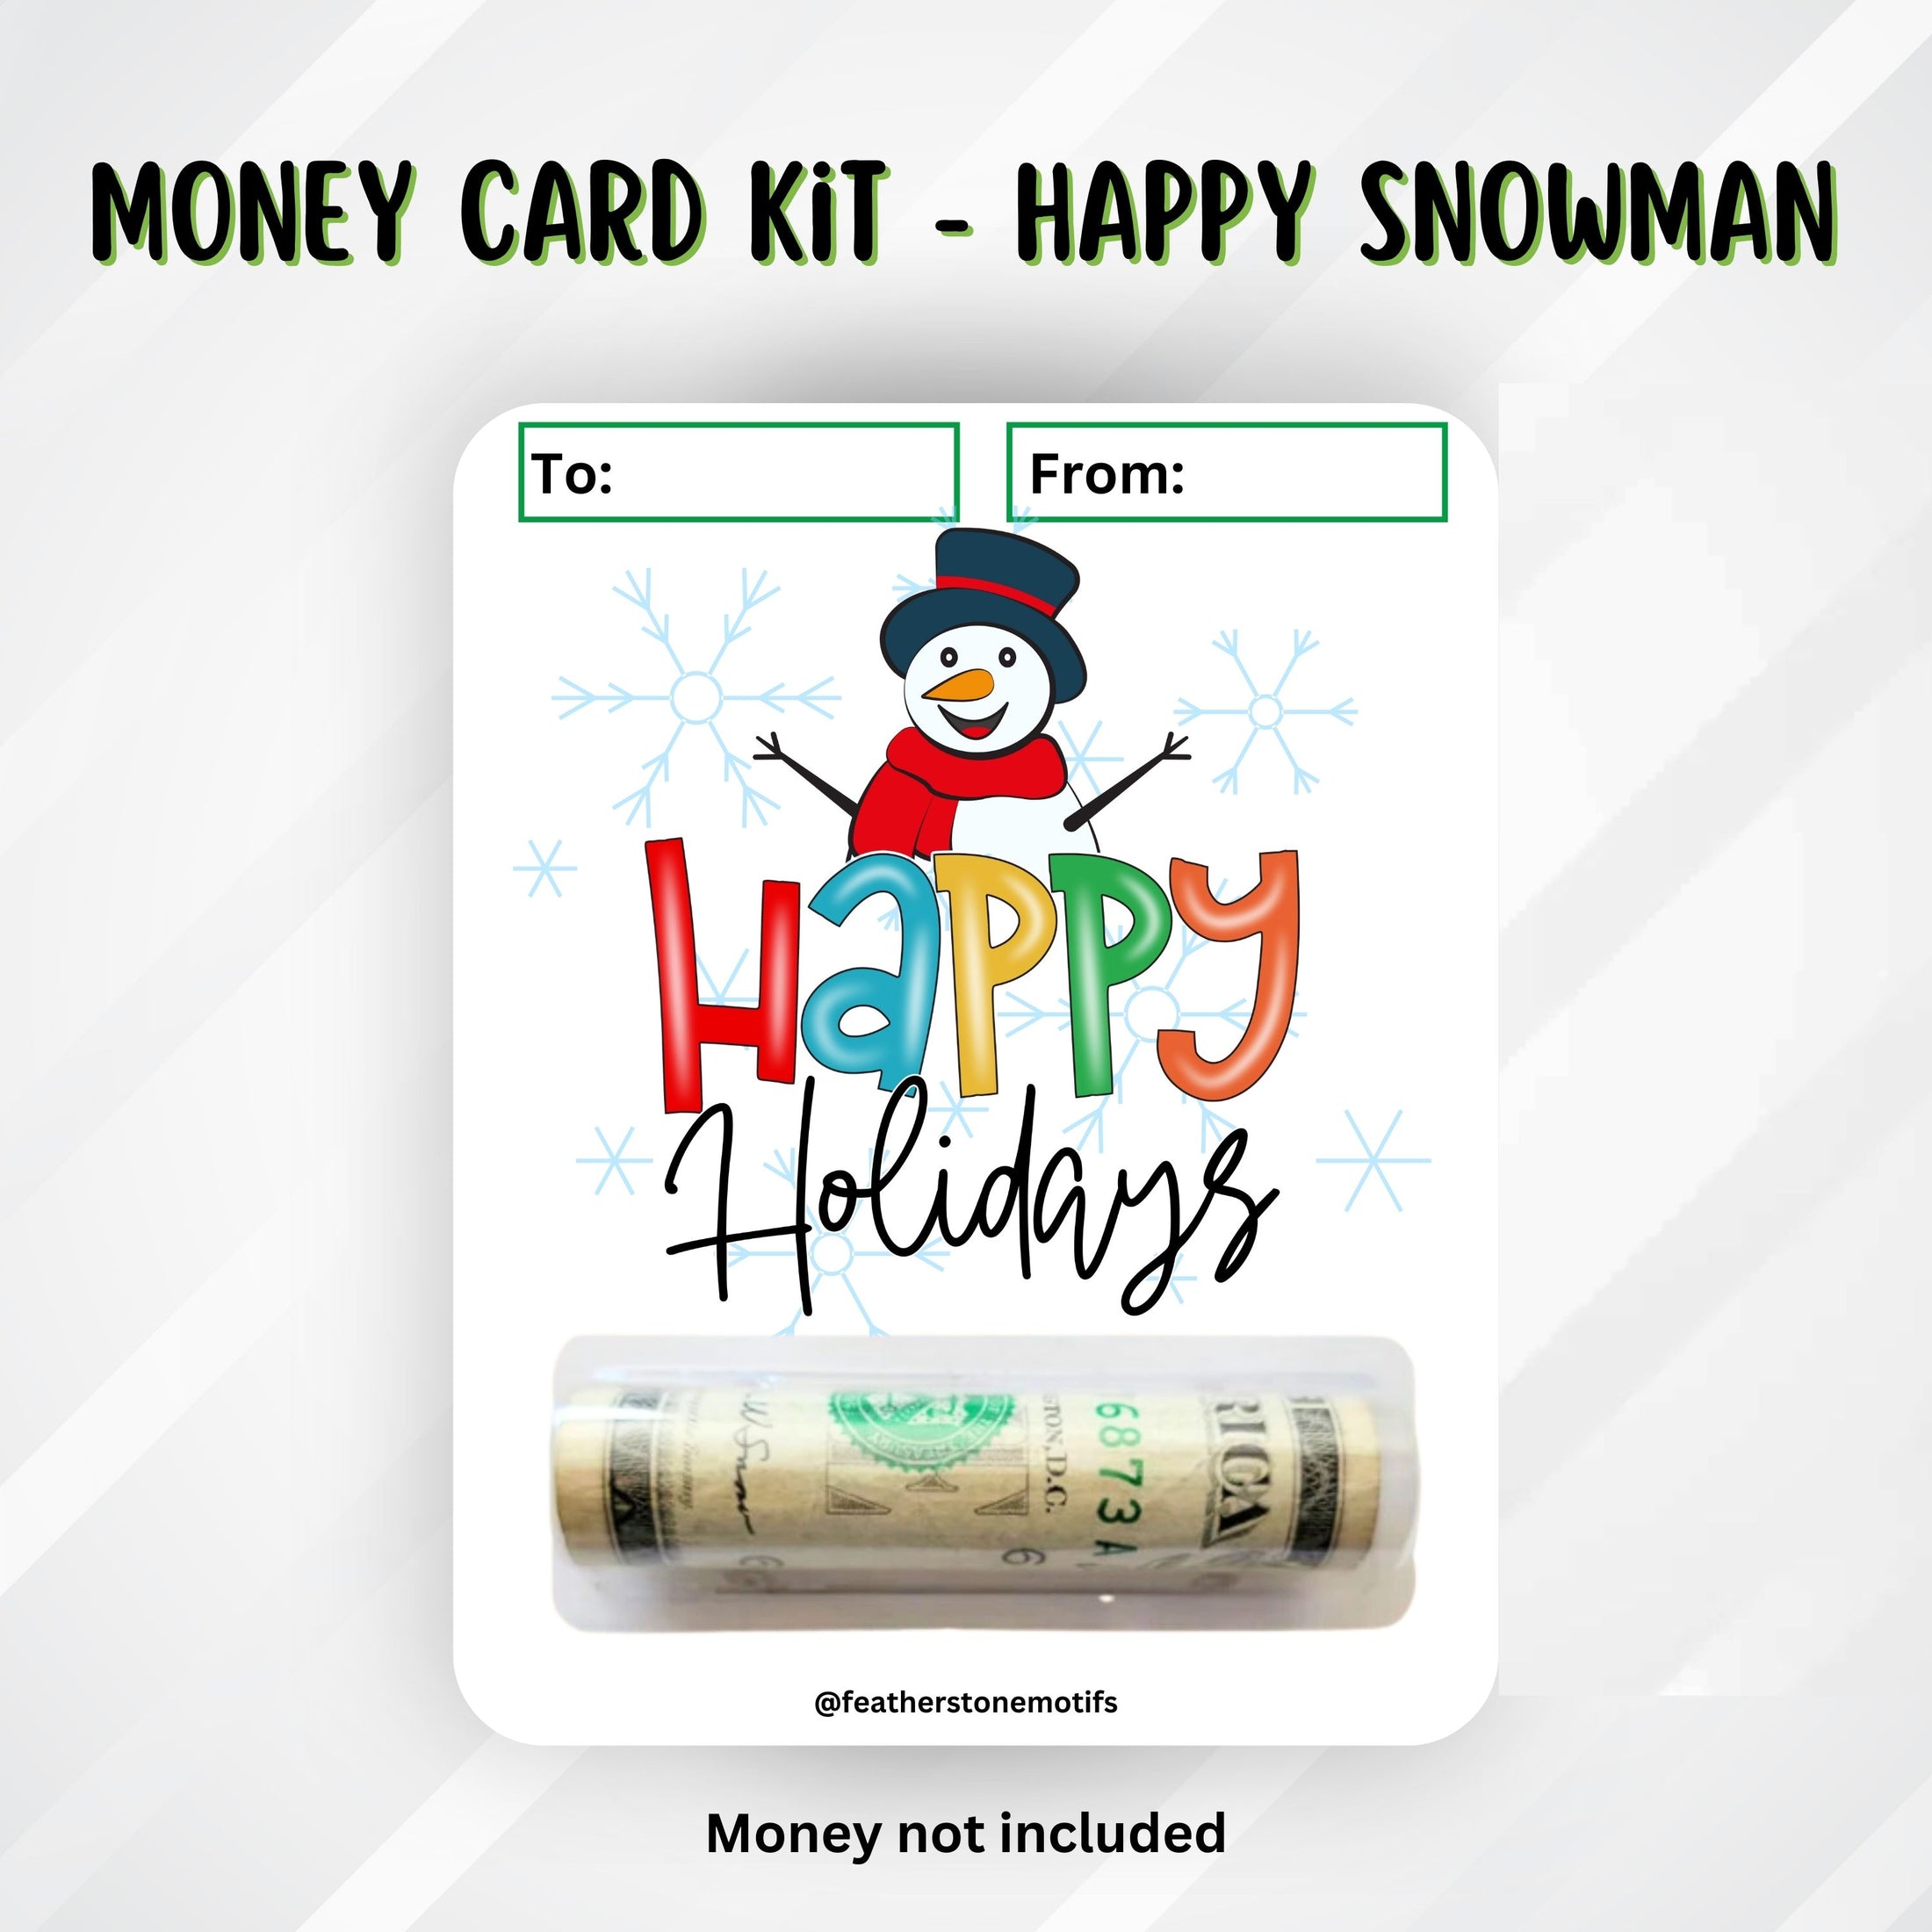 This image shows the money tube attached to the Happy Snowman Money Card.